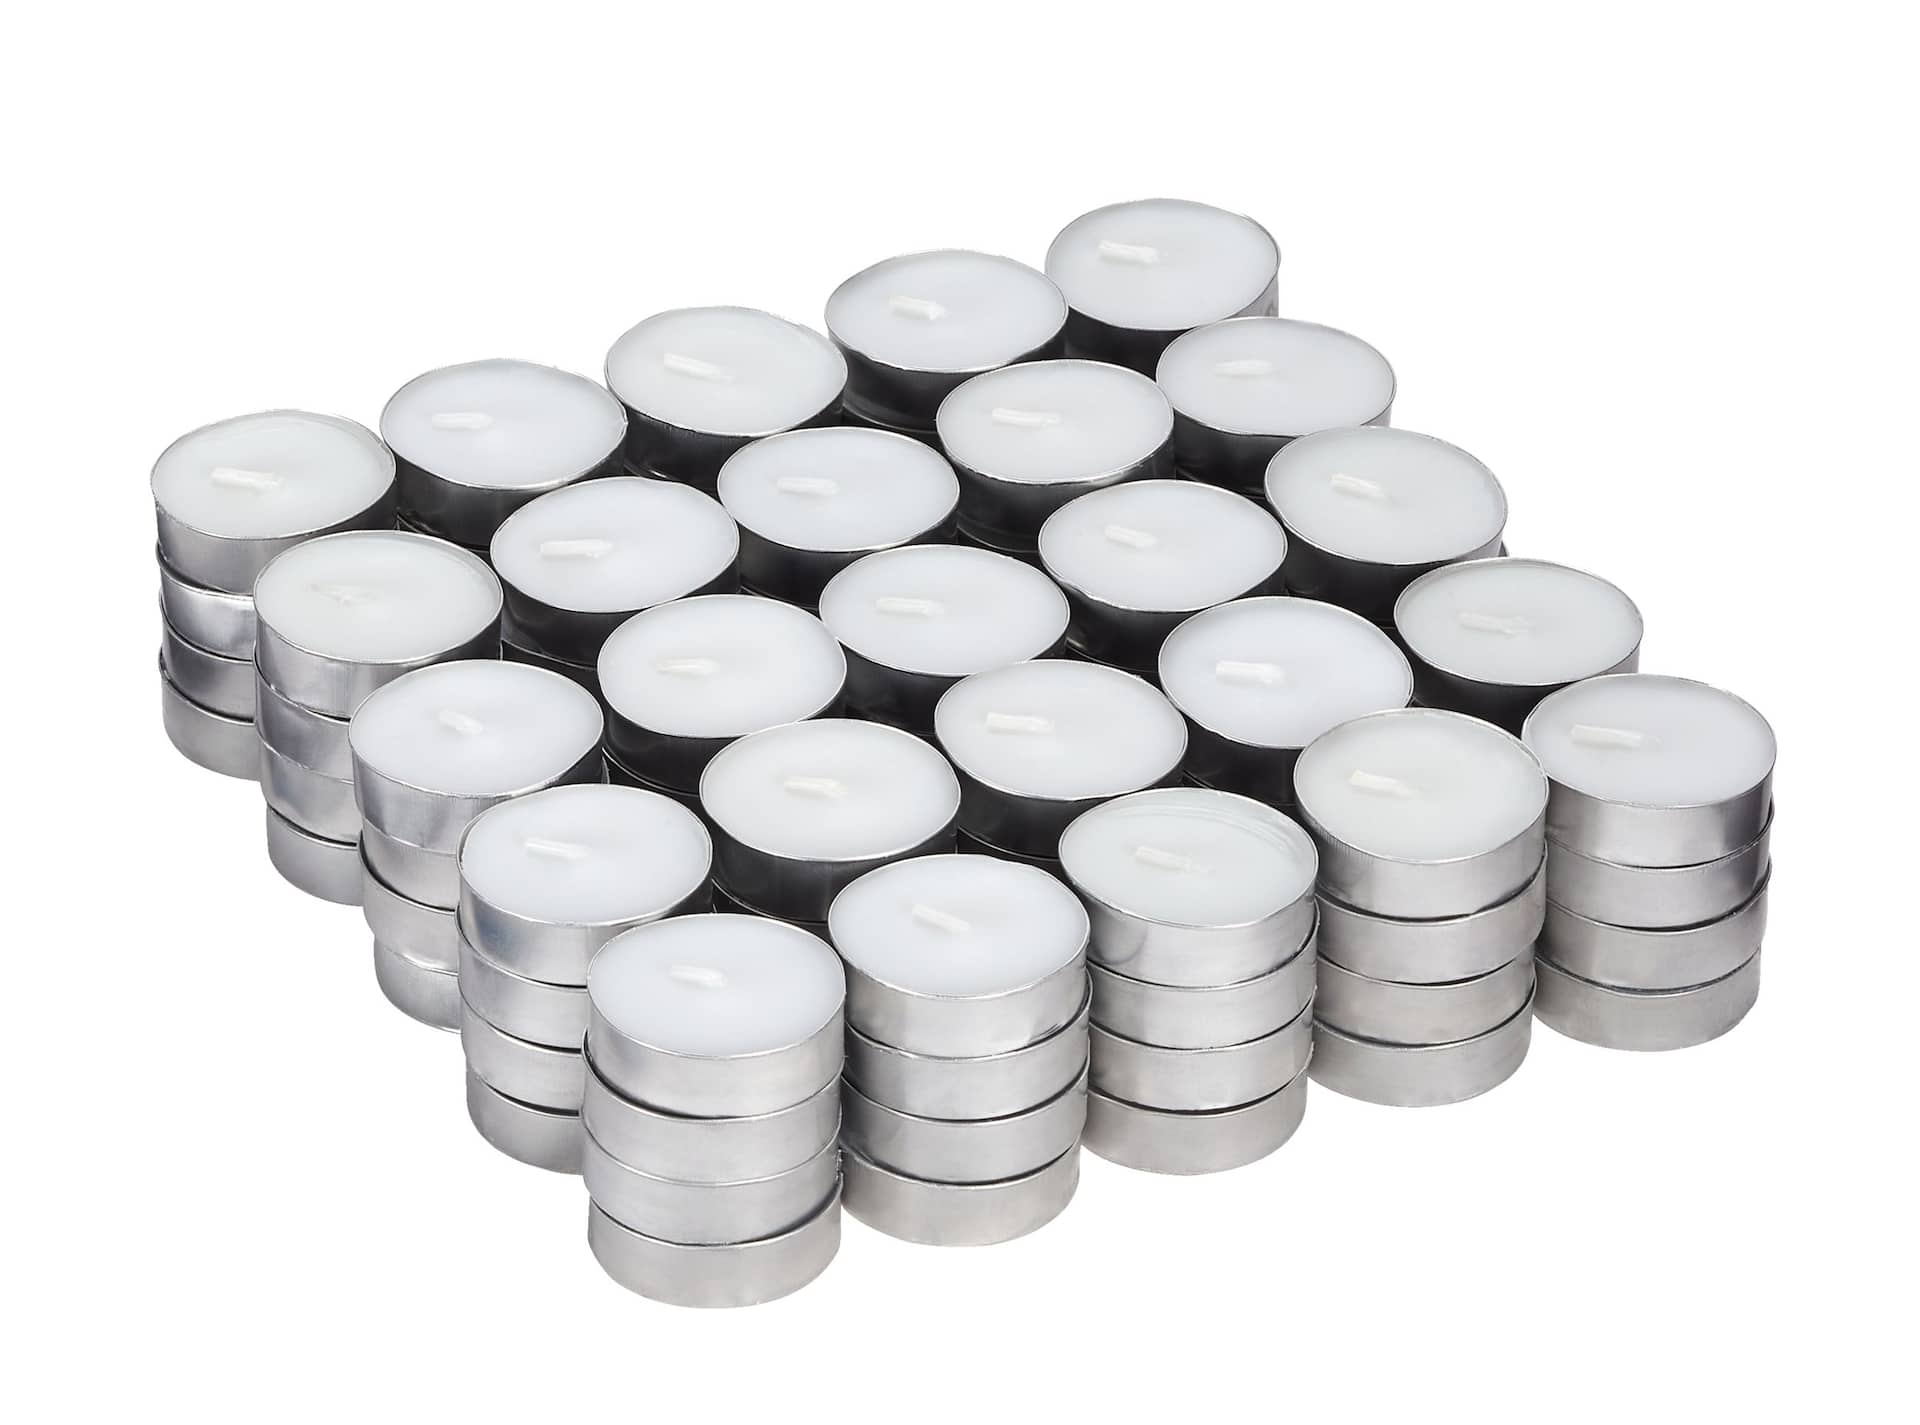 CANVAS Tealight Candles, 100-pk | Canadian Tire